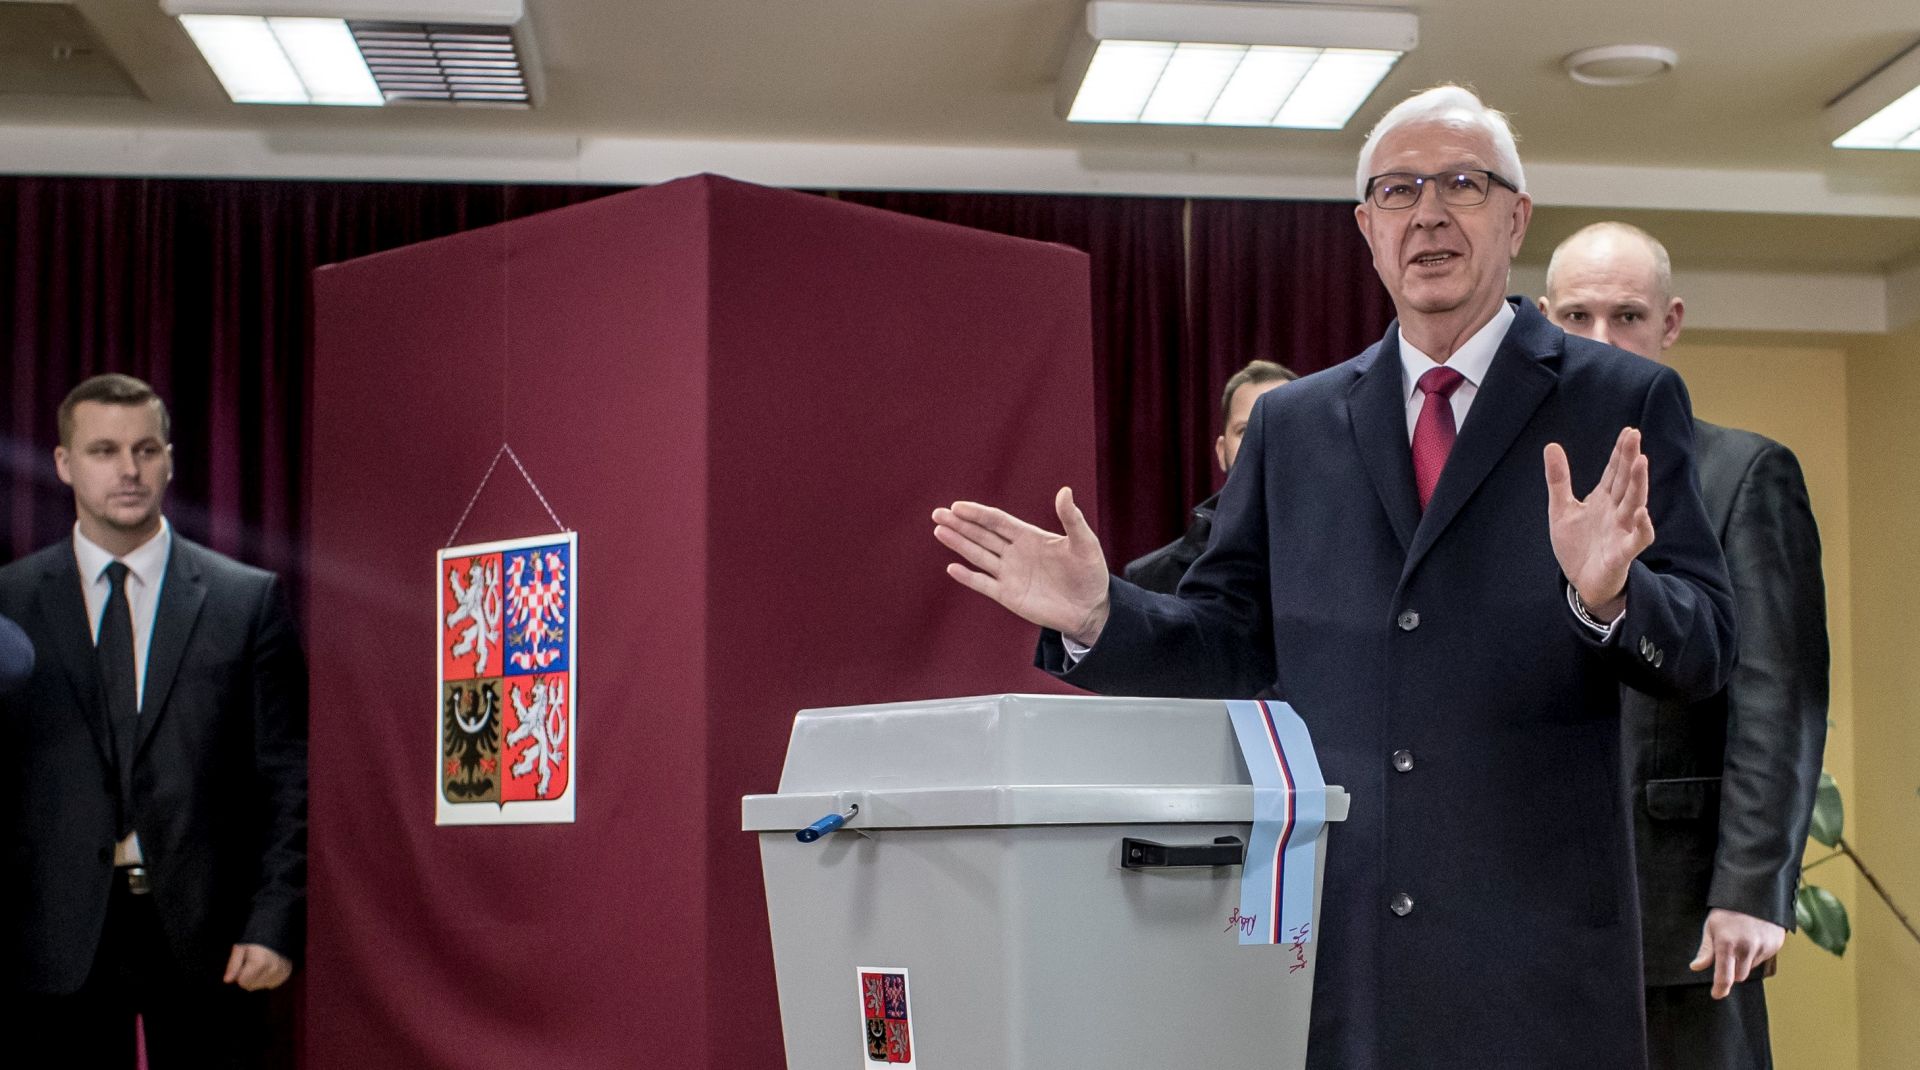 epa06476049 Czech presidential candidate Jiri Drahos gestures as he casted ballot at a polling station during voting in the presidential election run-off in Prague, Czech Republic, 26 January 2018. The second round of presidential elections in the Czech Republic will take place on 26 and 27 January 2018. Former chairman of the Czech Science Academy Jiri Drahos will be confronted with his opponent, current Czech President Milos Zeman.  EPA/MARTIN DIVISEK